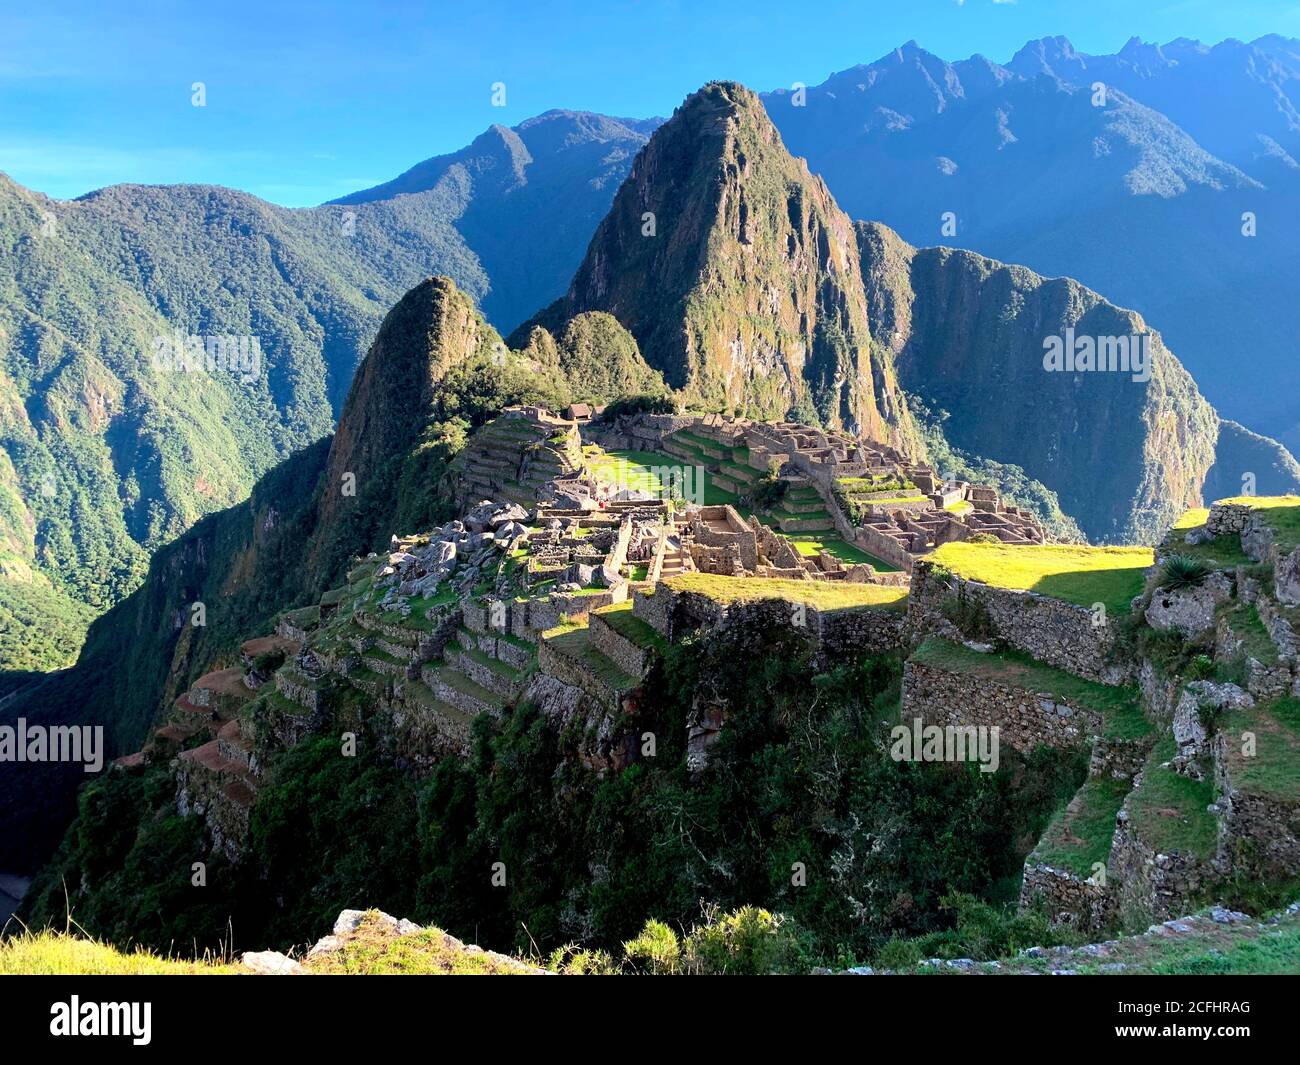 Machu Picchu great lost city of Inca Empire in Andes mountains, peru. Stock Photo